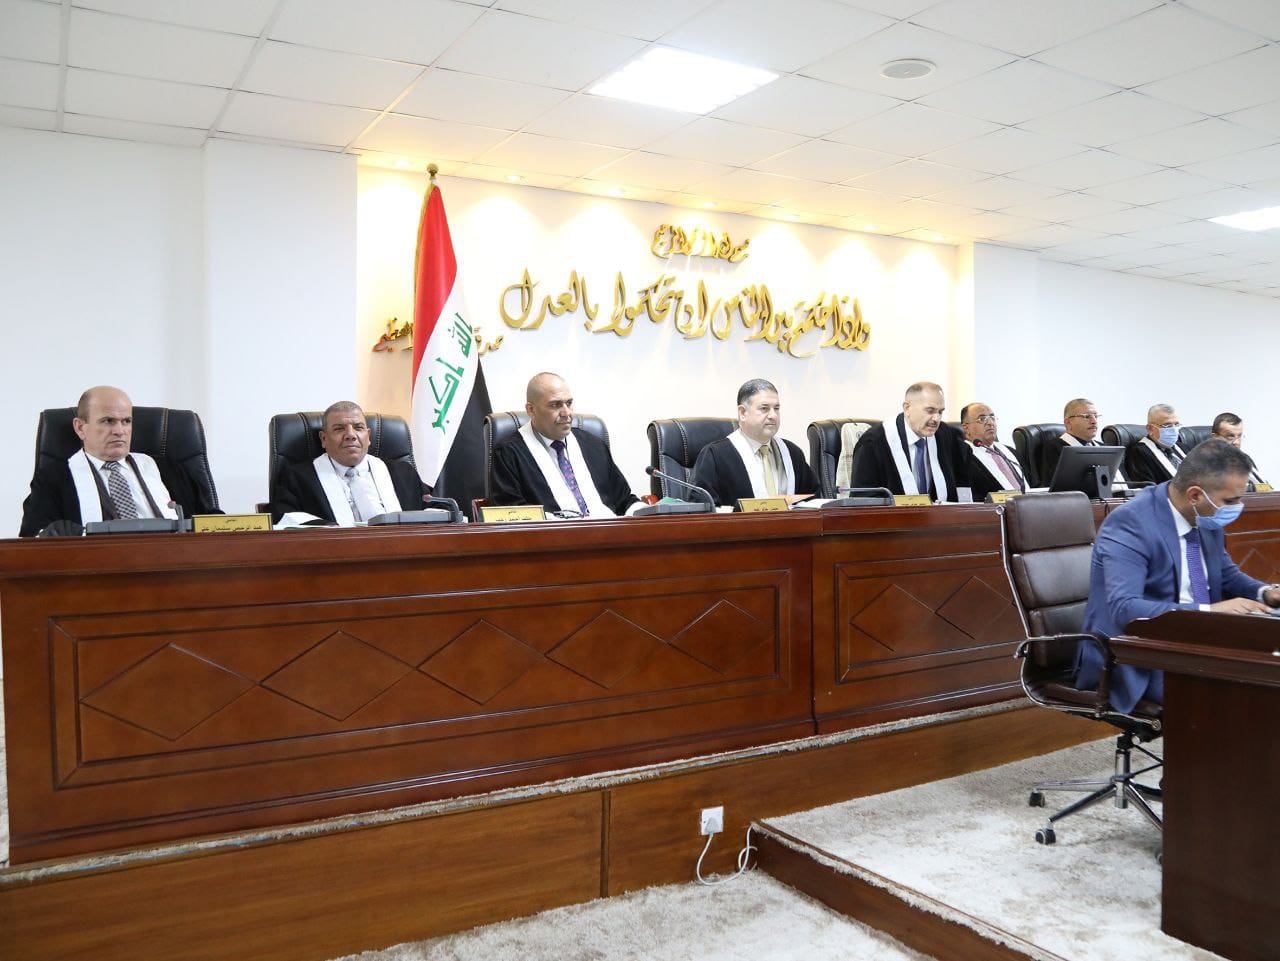 The Federal Supreme Court was judged by the unconstitutionality of Article 14/1st of the third amendment of the Governorates incorporated into a Region Law.